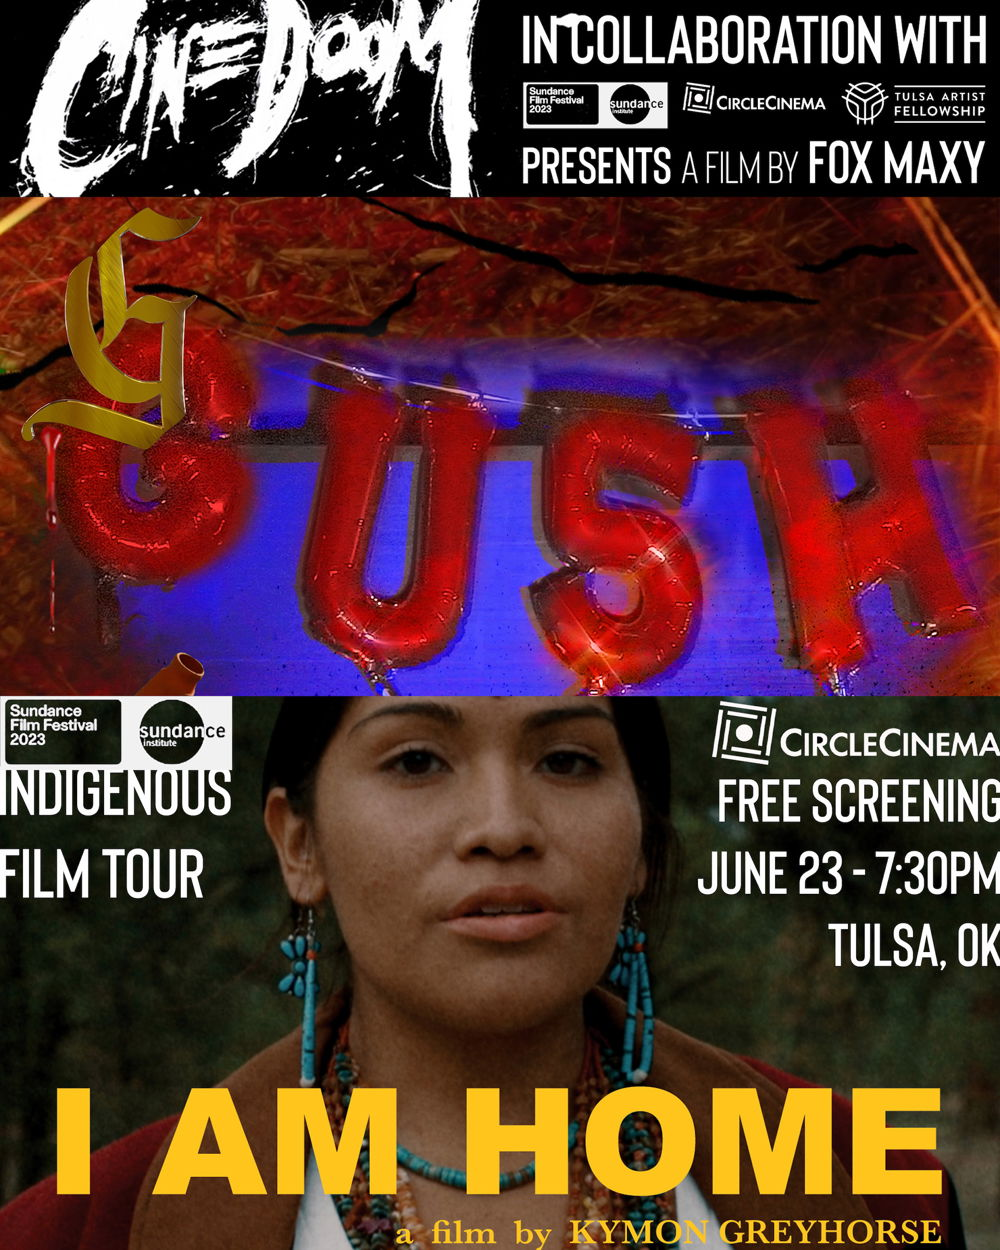 A flier with text and movie studio logos on a black background advertising a film screening. The flier includes two film stills. The top image shows four red, letter-shaped helium balloons that form the word, "GUSH” The bottom image is a close-up of a person's face with yellow text that reads, "I AM HOME." They have soft features, a medium-brown complexion, and straight, black hair that has been pulled back. They wear jewelry made of turquoise.